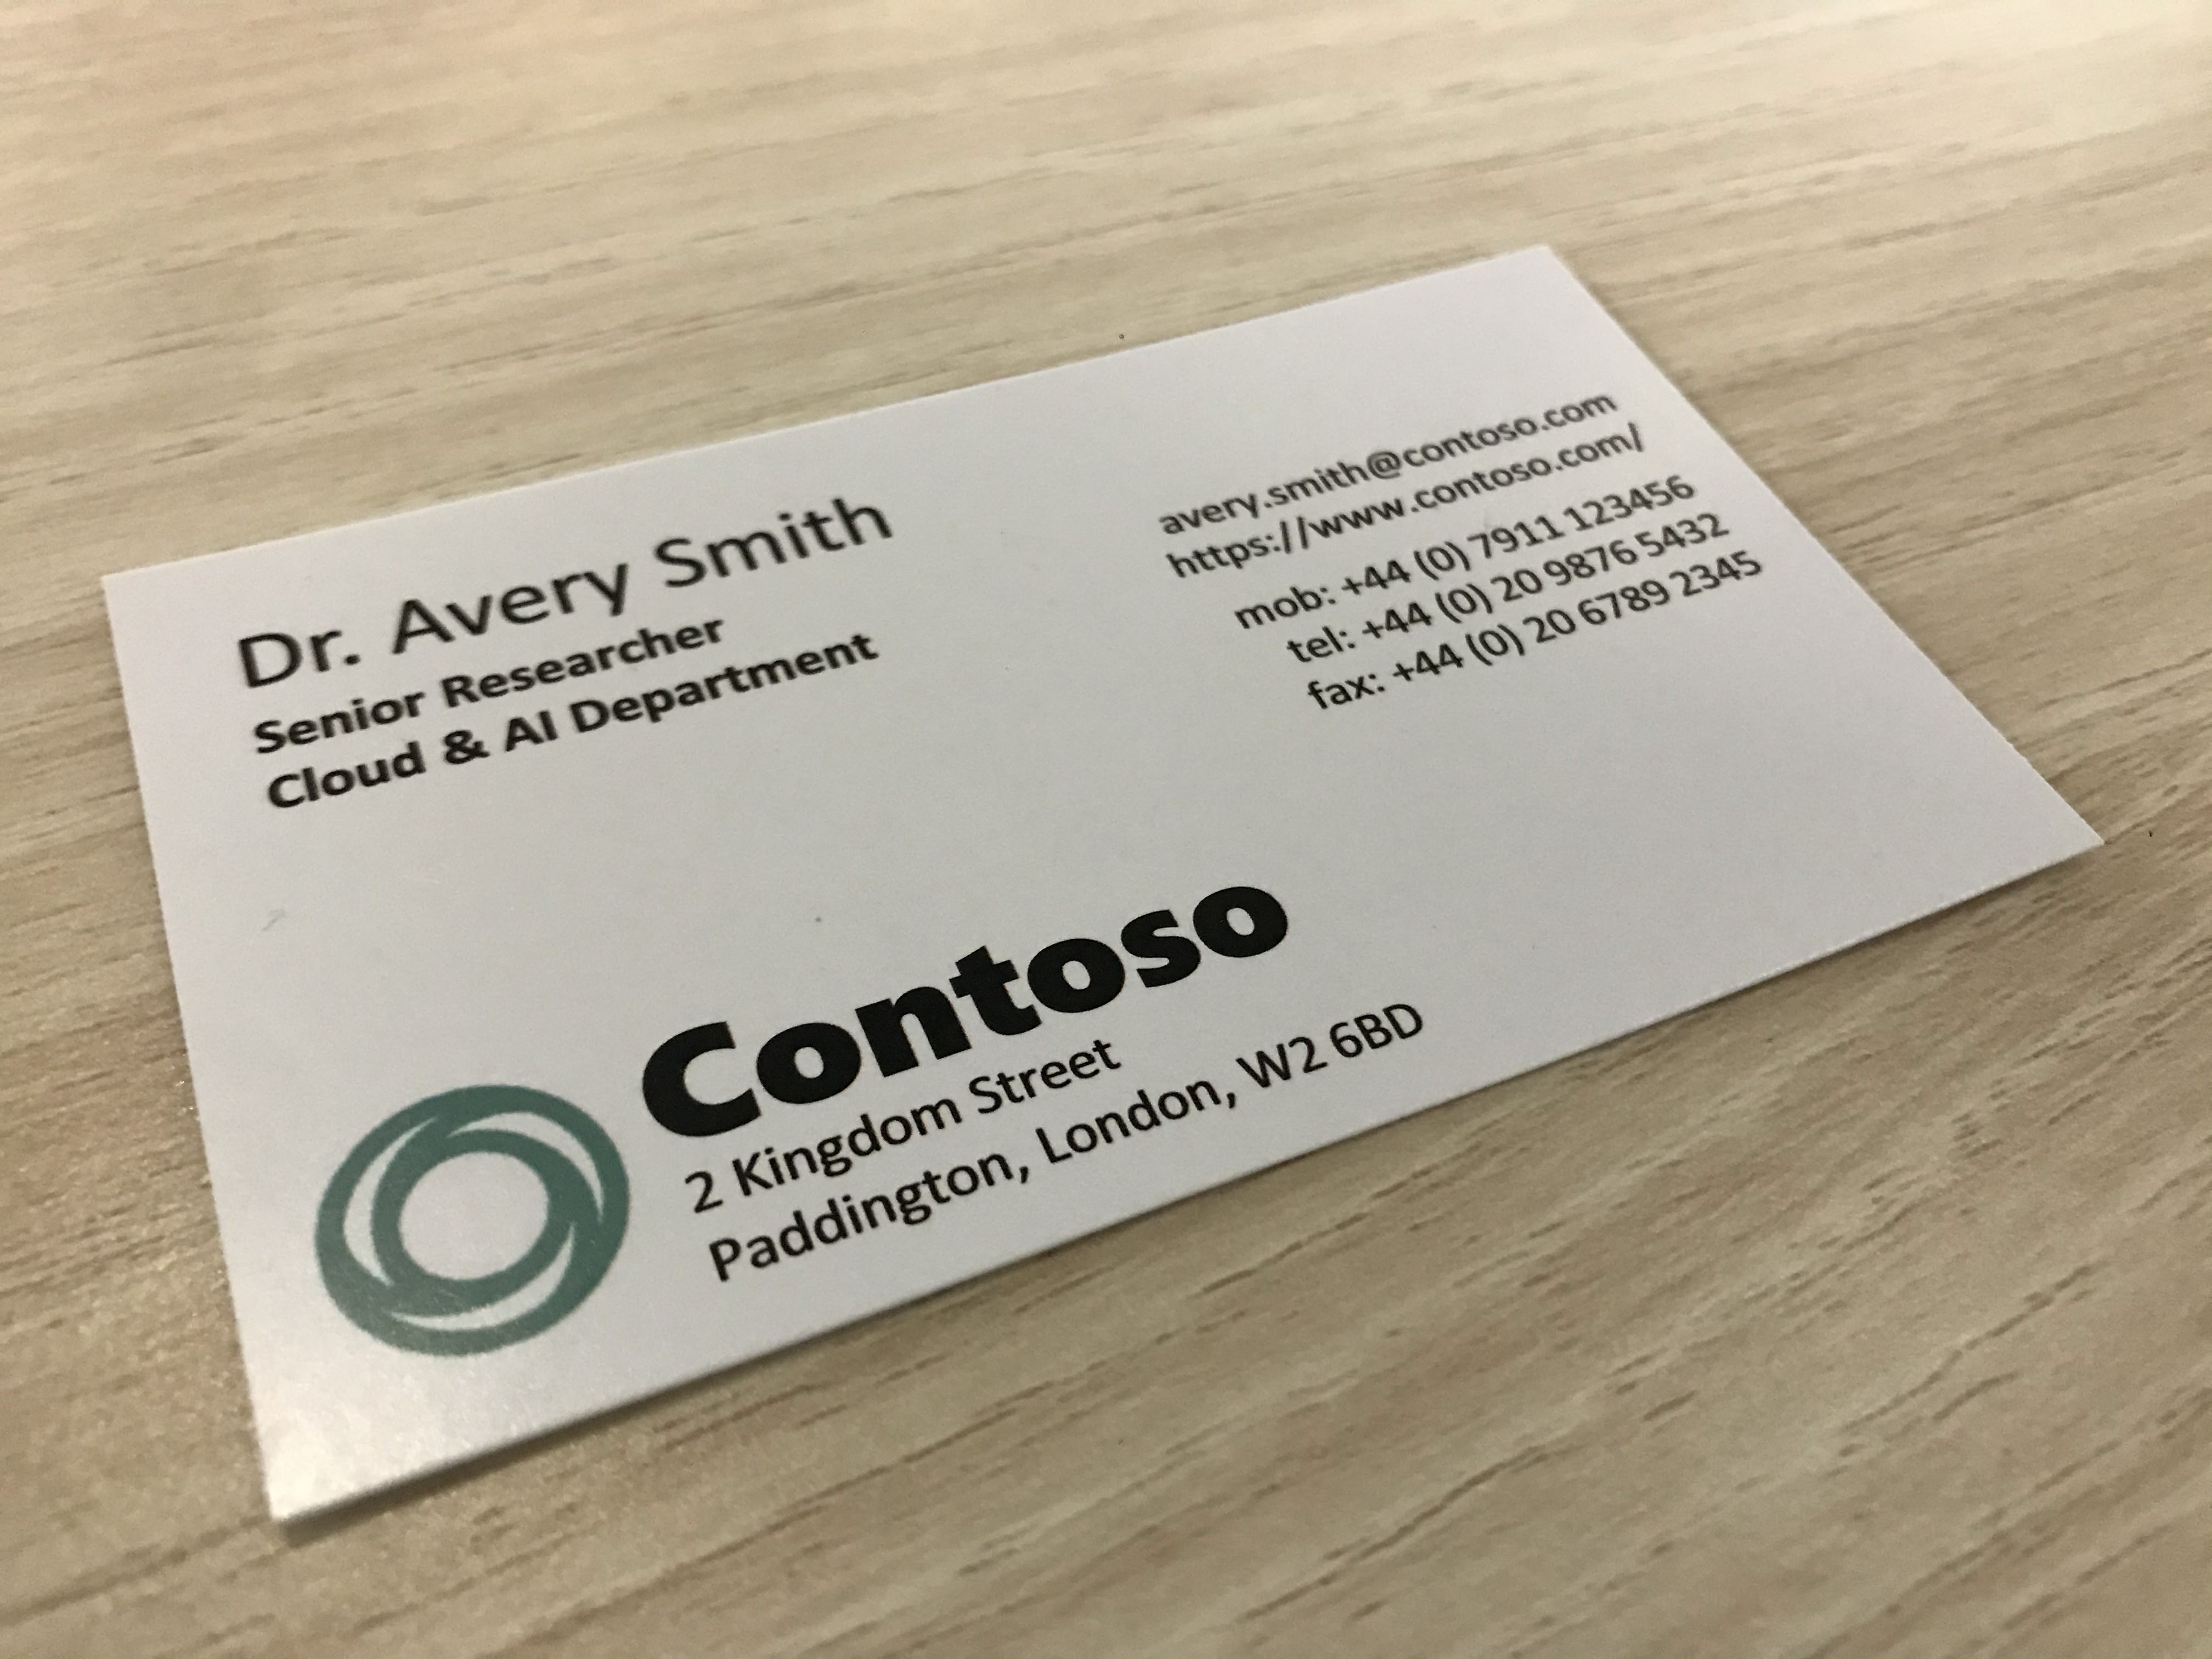 Photograph of an example business card.